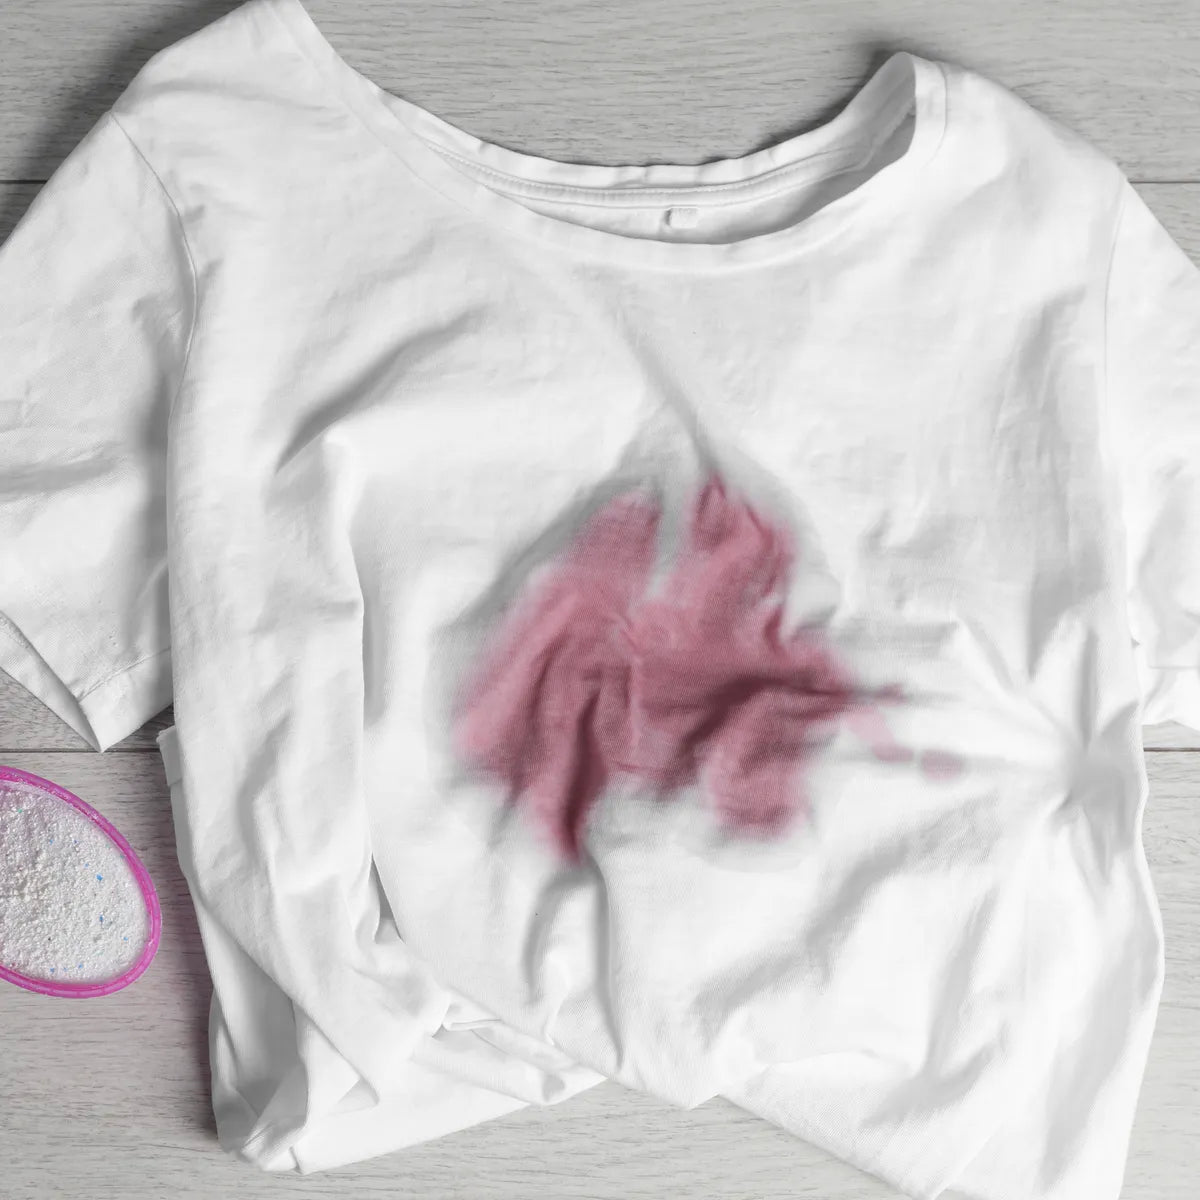 How to Remove a Stain From a White Shirt - Negative Apparel